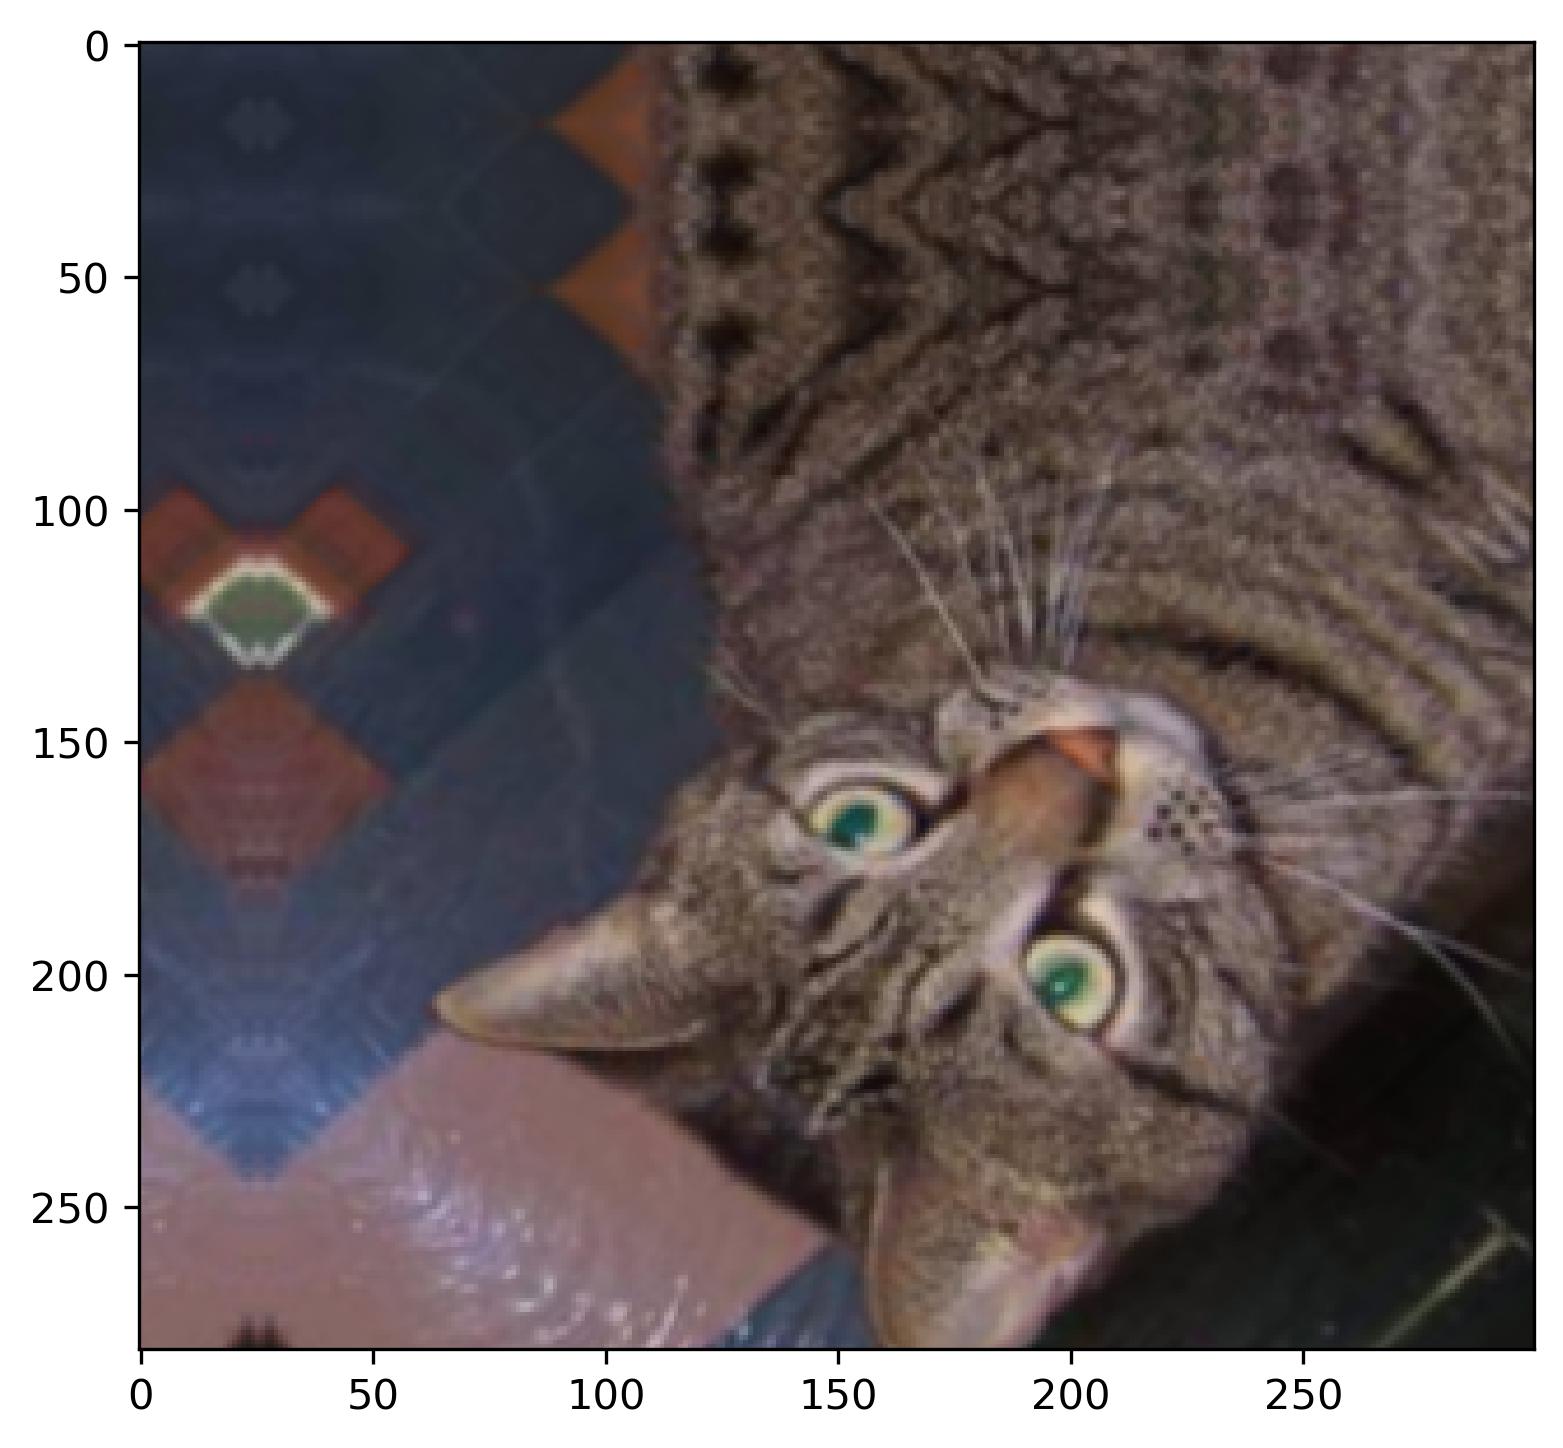 Image 5 - Cat image after flipping, rotating, zooming, and translating (image by author)